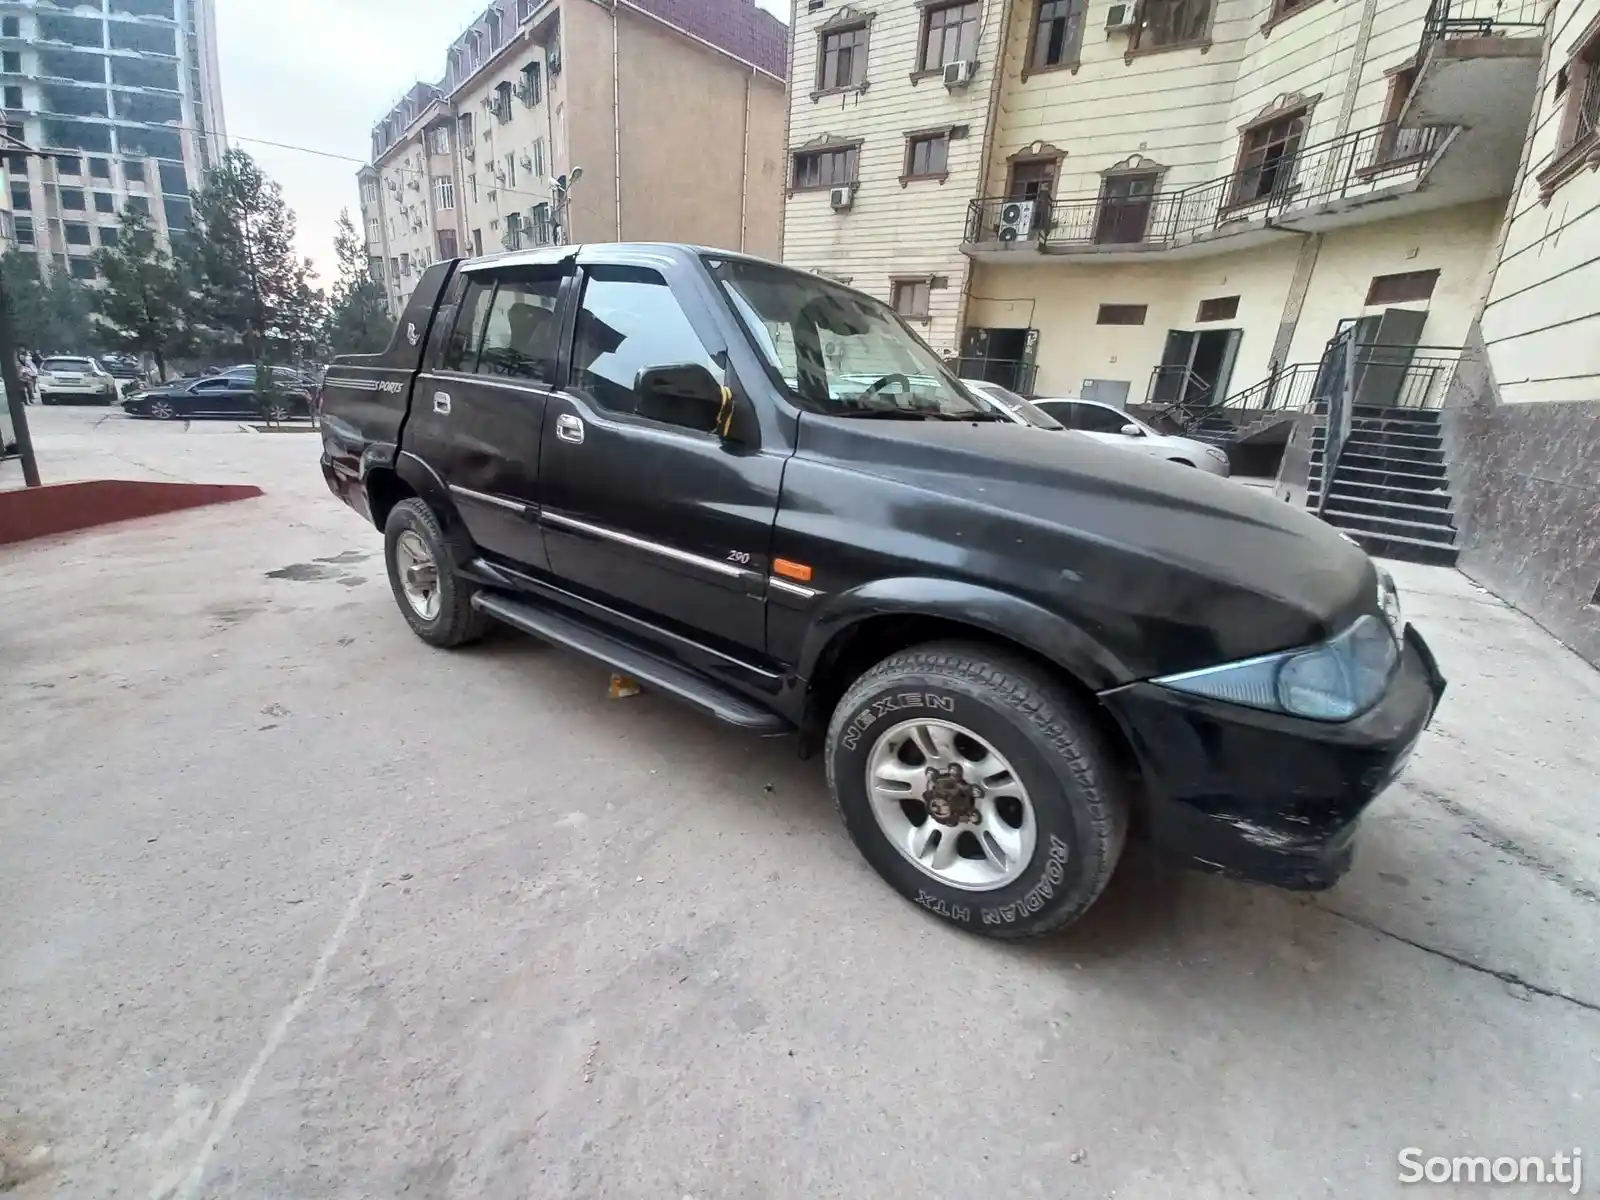 Ssang Yong Musso Sport, 2004-1